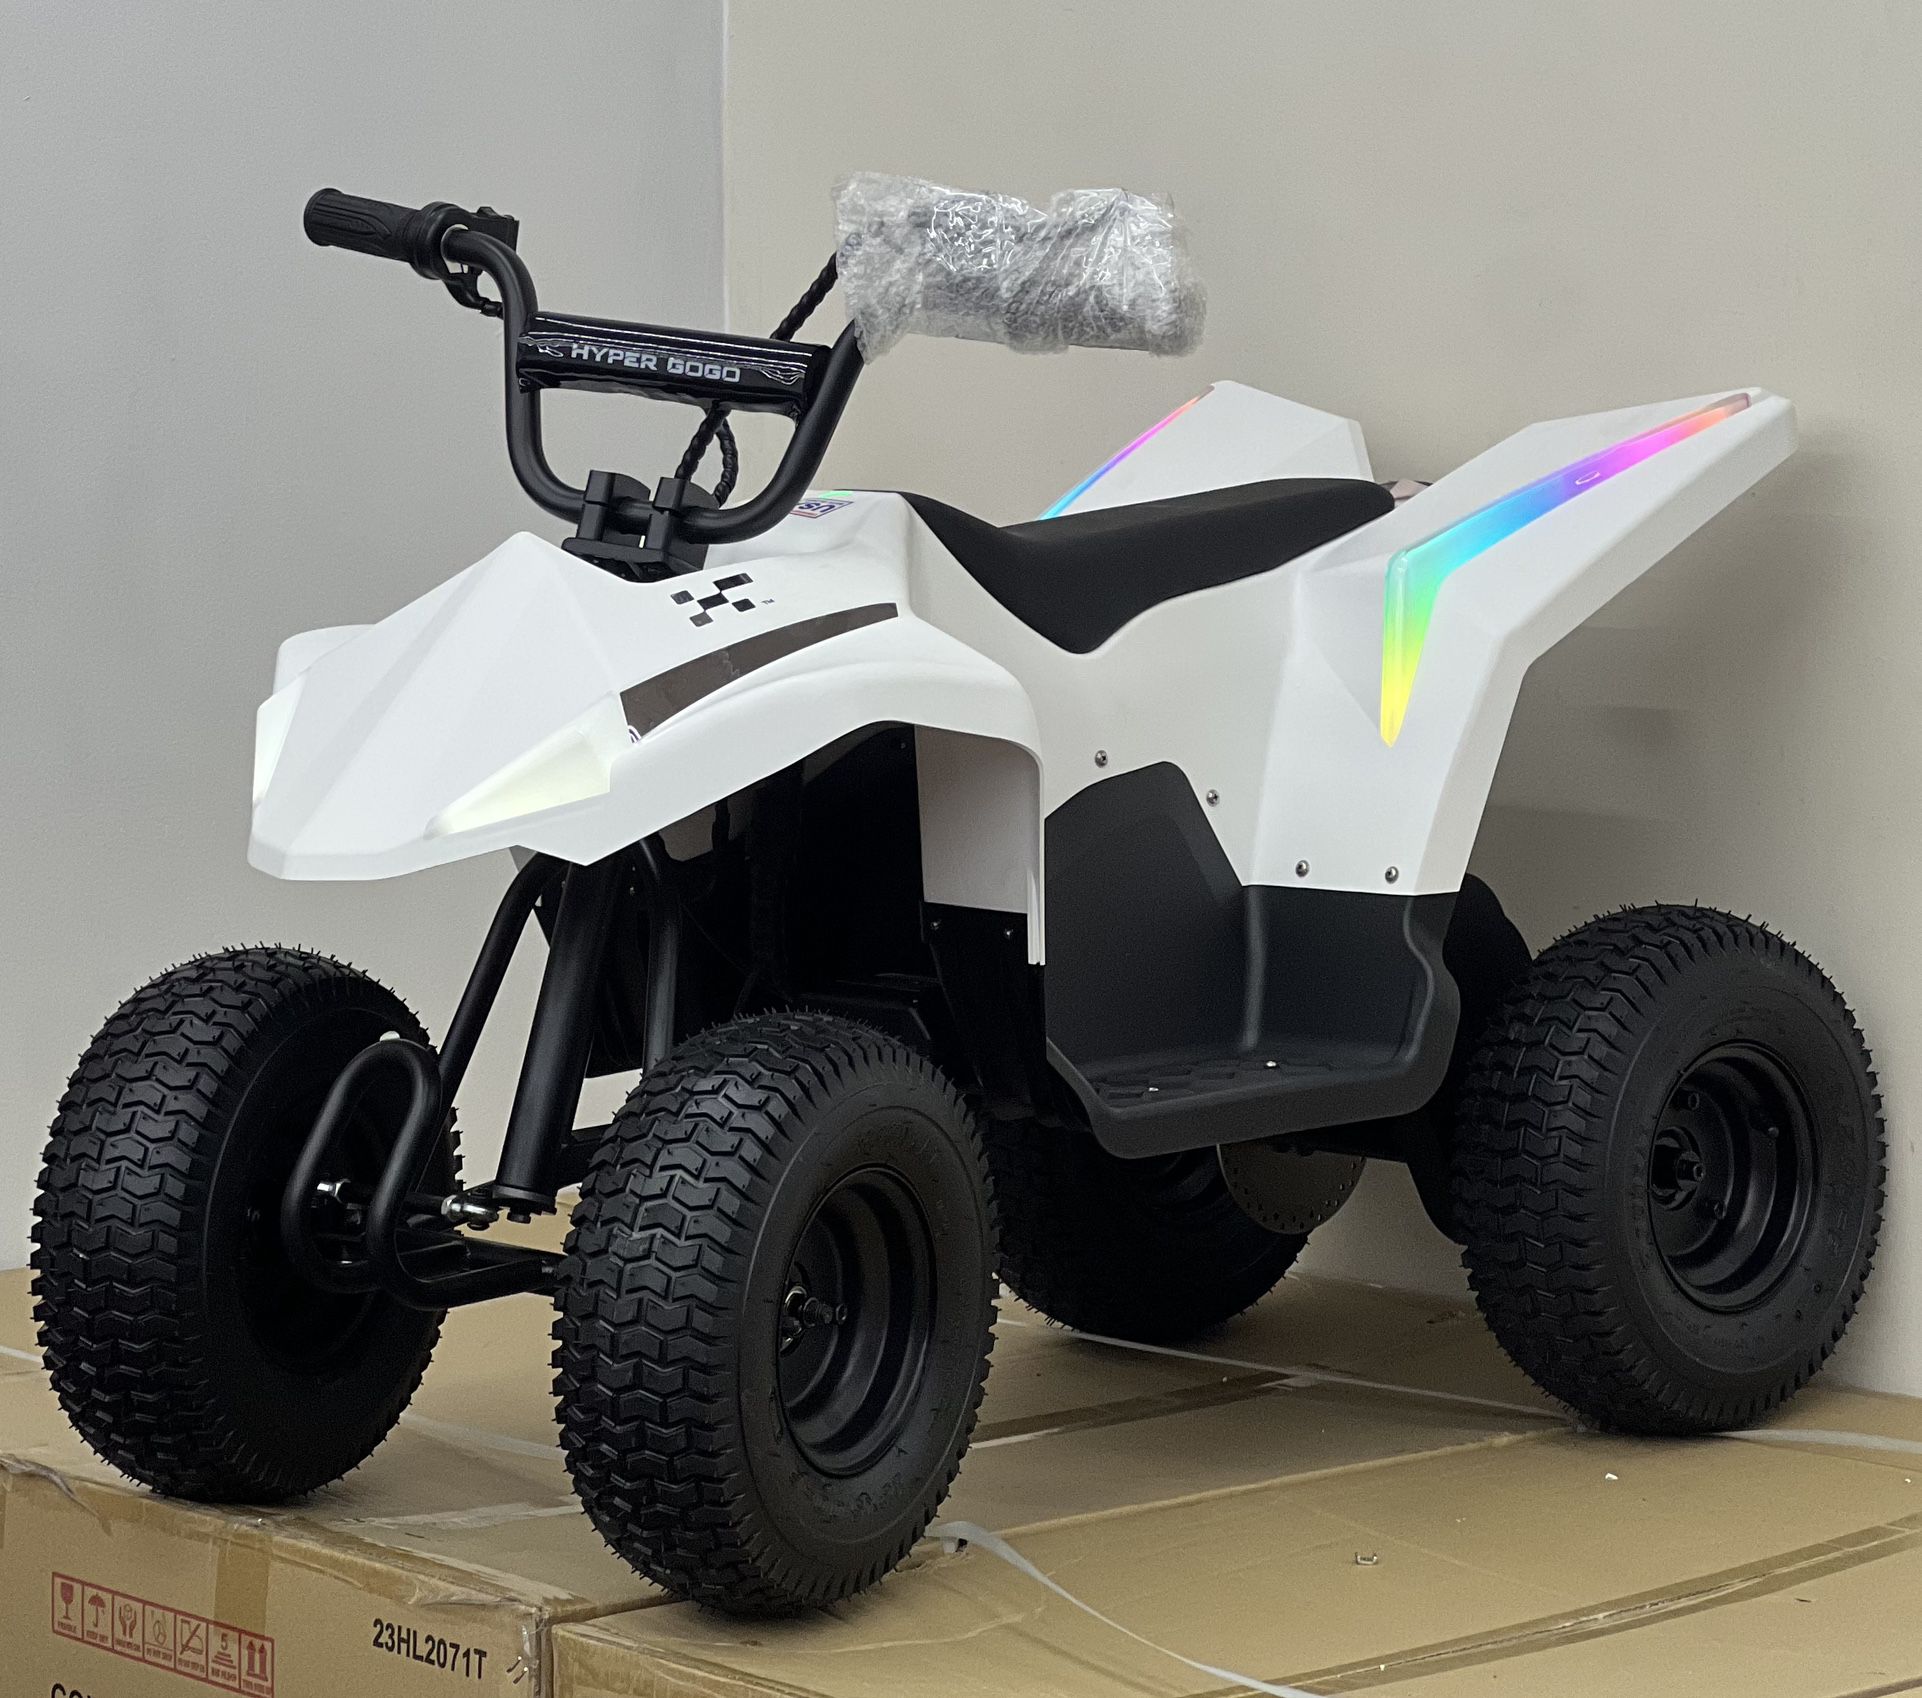 36V Super Heavy duty ATV with Disc brake Summer Sale Special !! Financing available